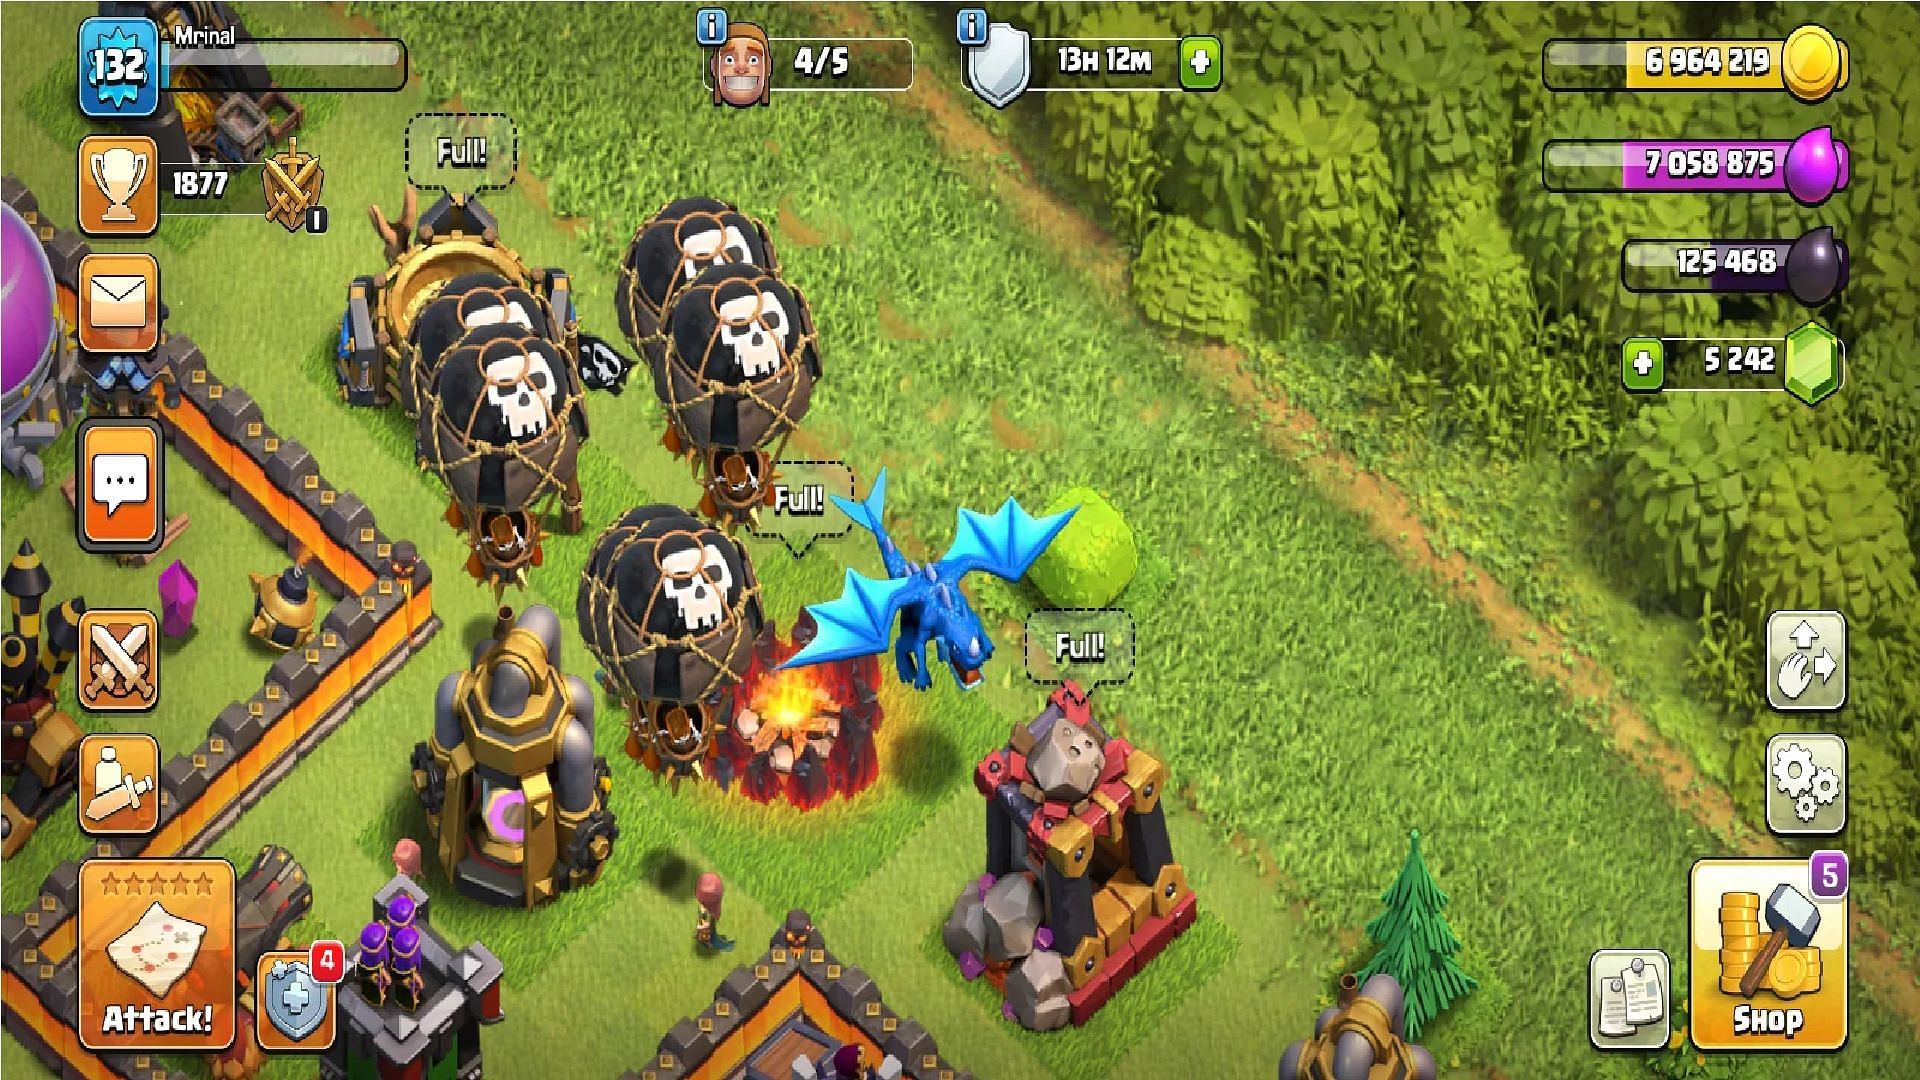 Their Chain of Lightning will damage the high HP buildings first (Image via Supercell)